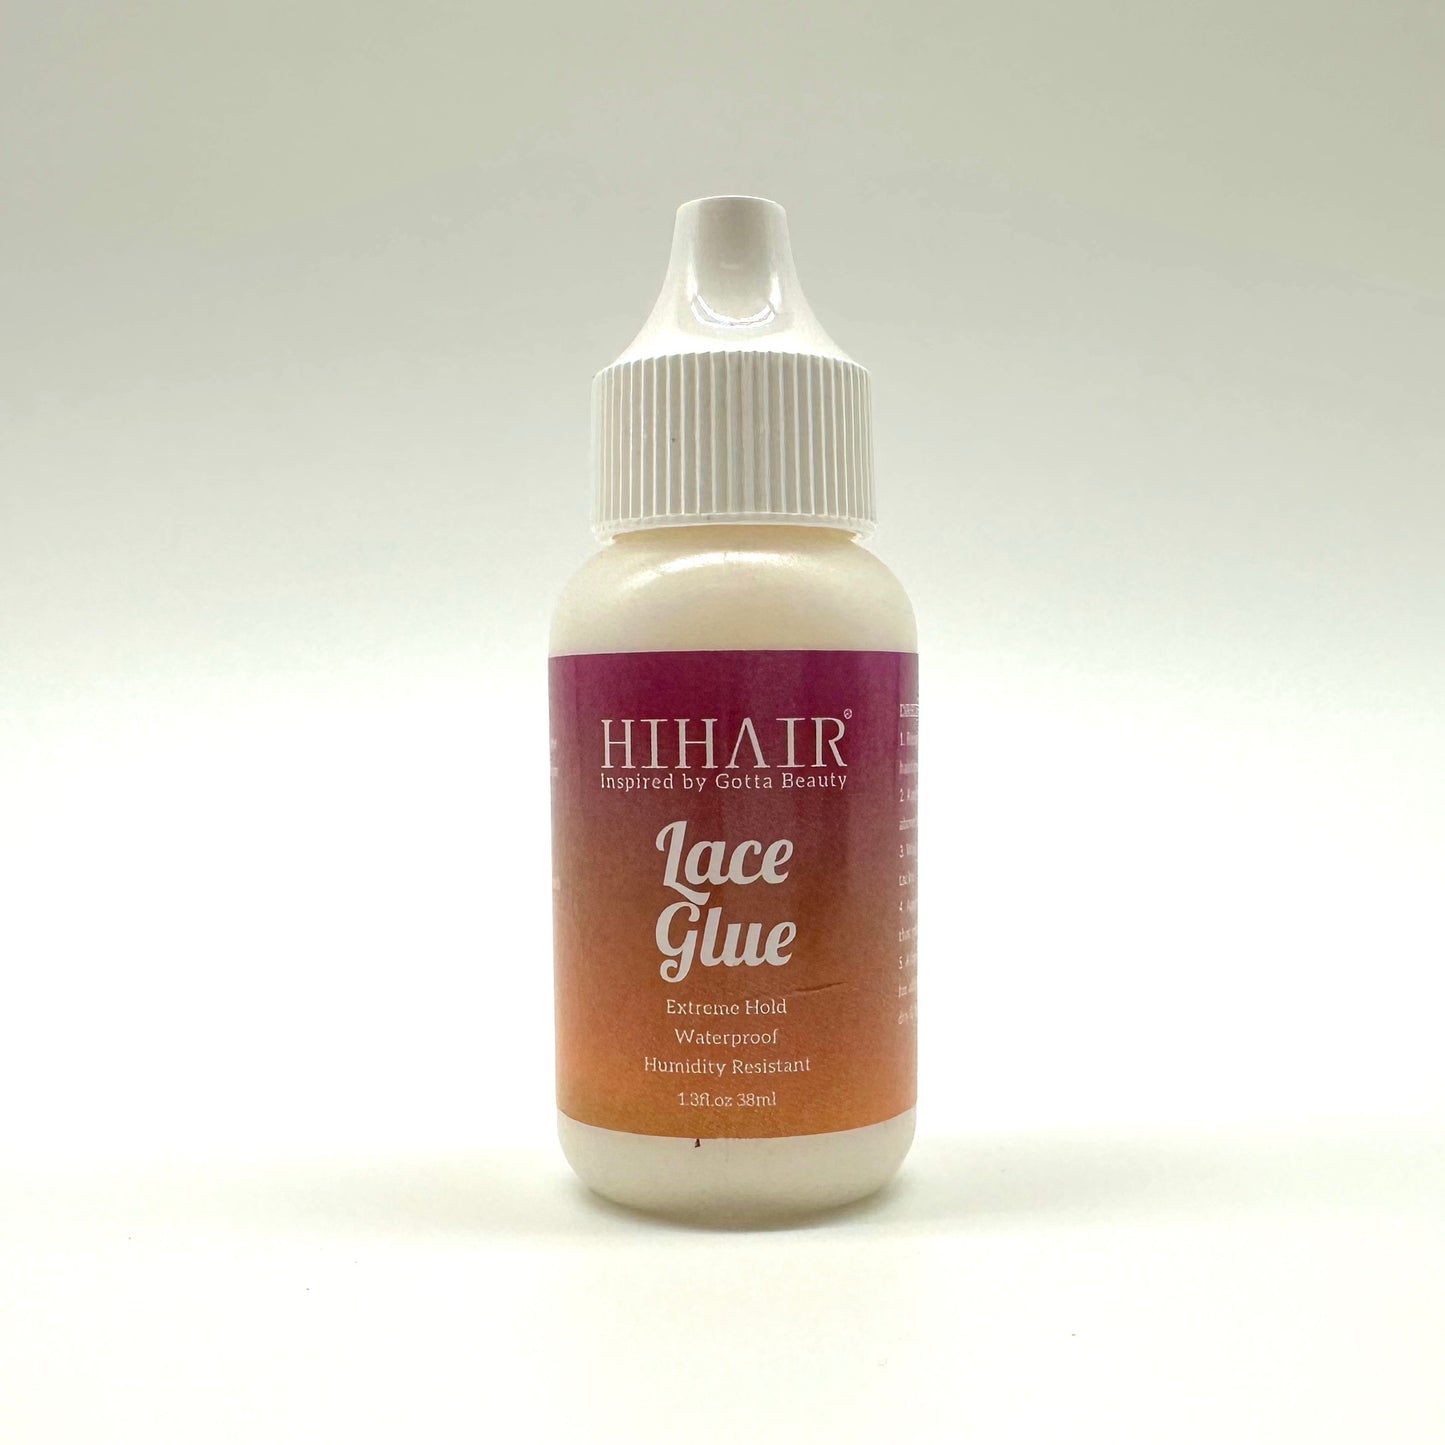 HIHAIR® EXTREME HOLD LACE GLUE / WIG ADHESIVE 1.3 OZ.